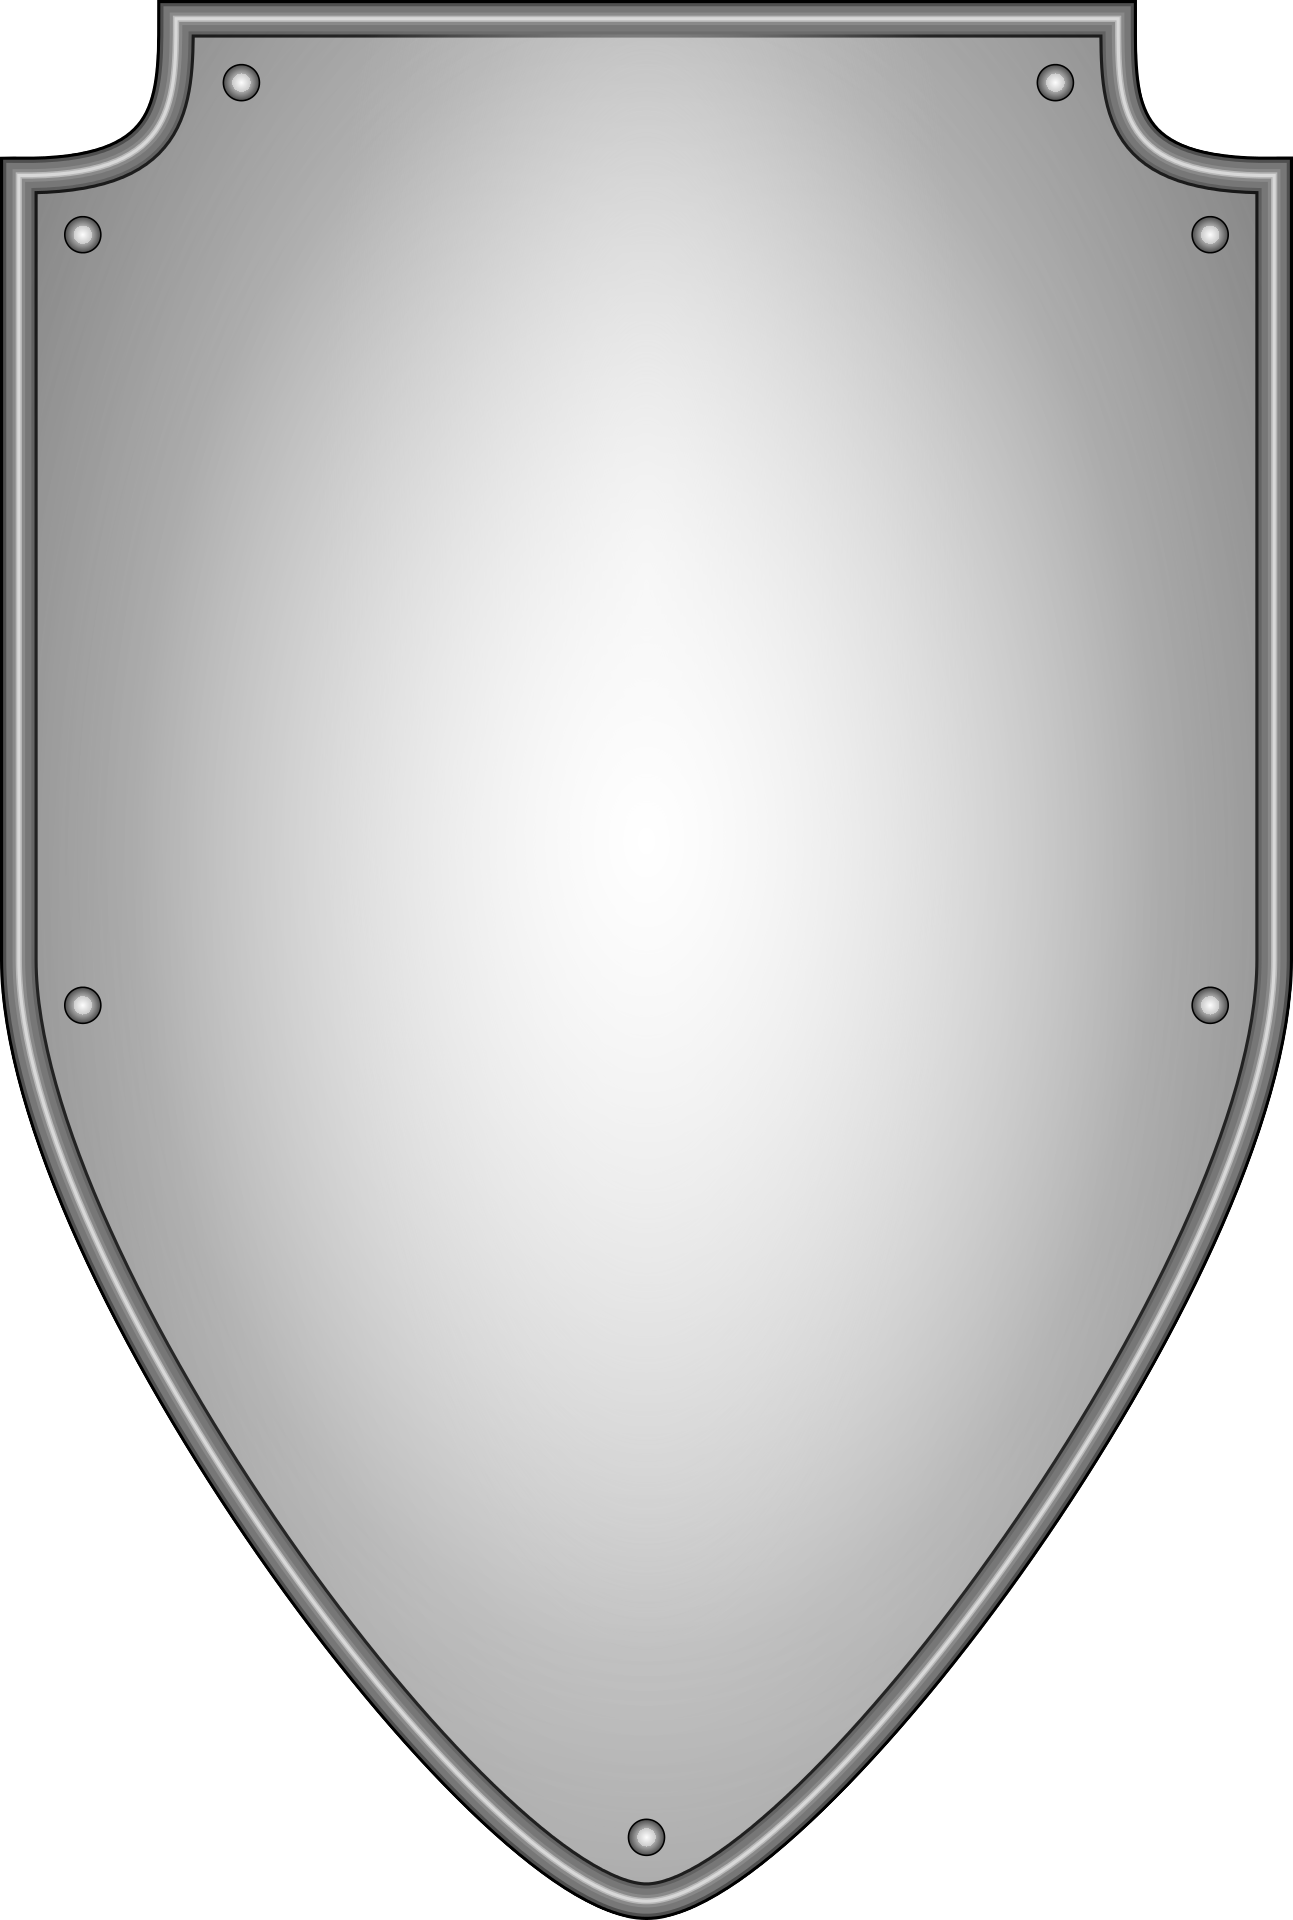 Medieval Shield Blank Make Your Own Coat of Arms